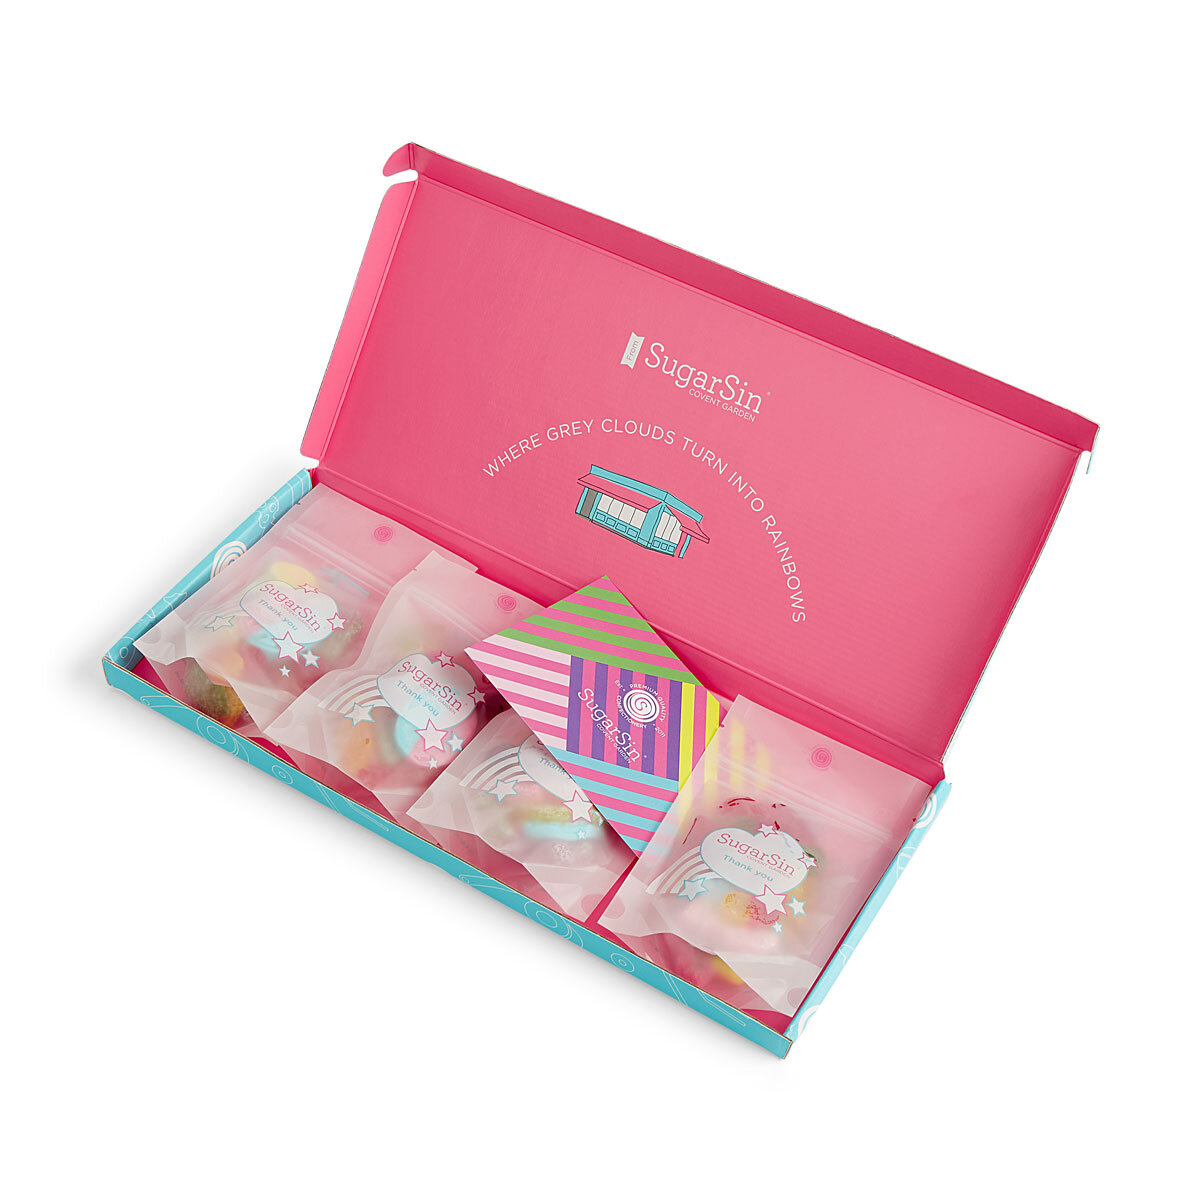 SugarSin 'Thank You' Pick 'n' Mix Pouches Letterbox Gift in Blue